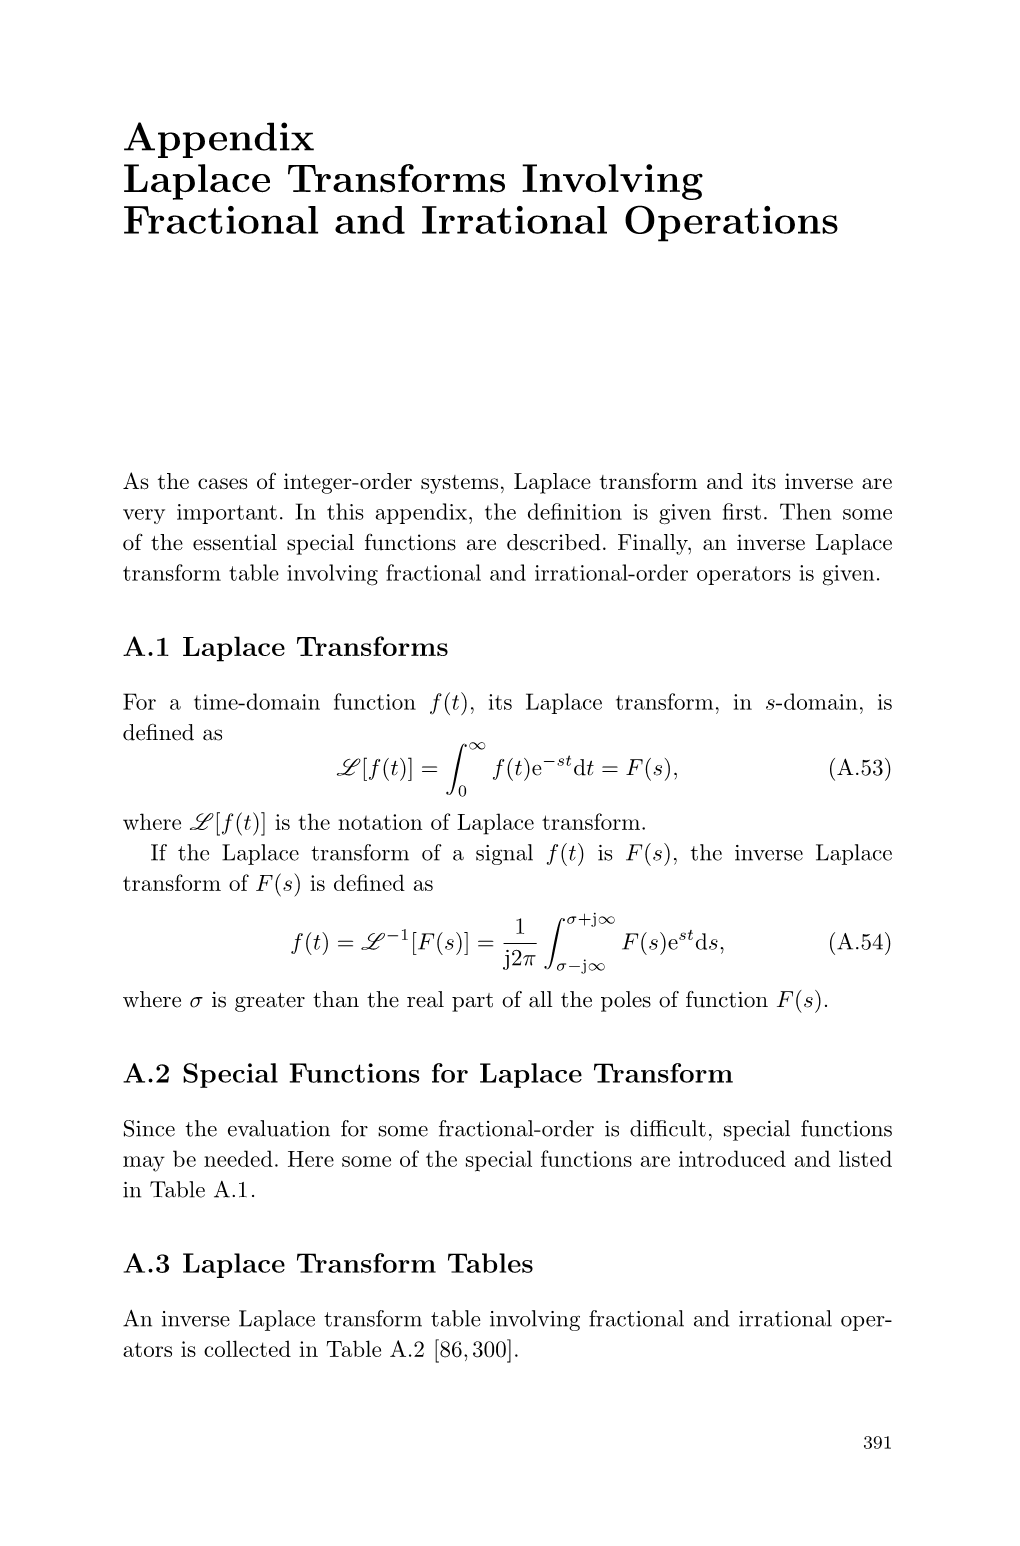 Appendix Laplace Transforms Involving Fractional and Irrational Operations